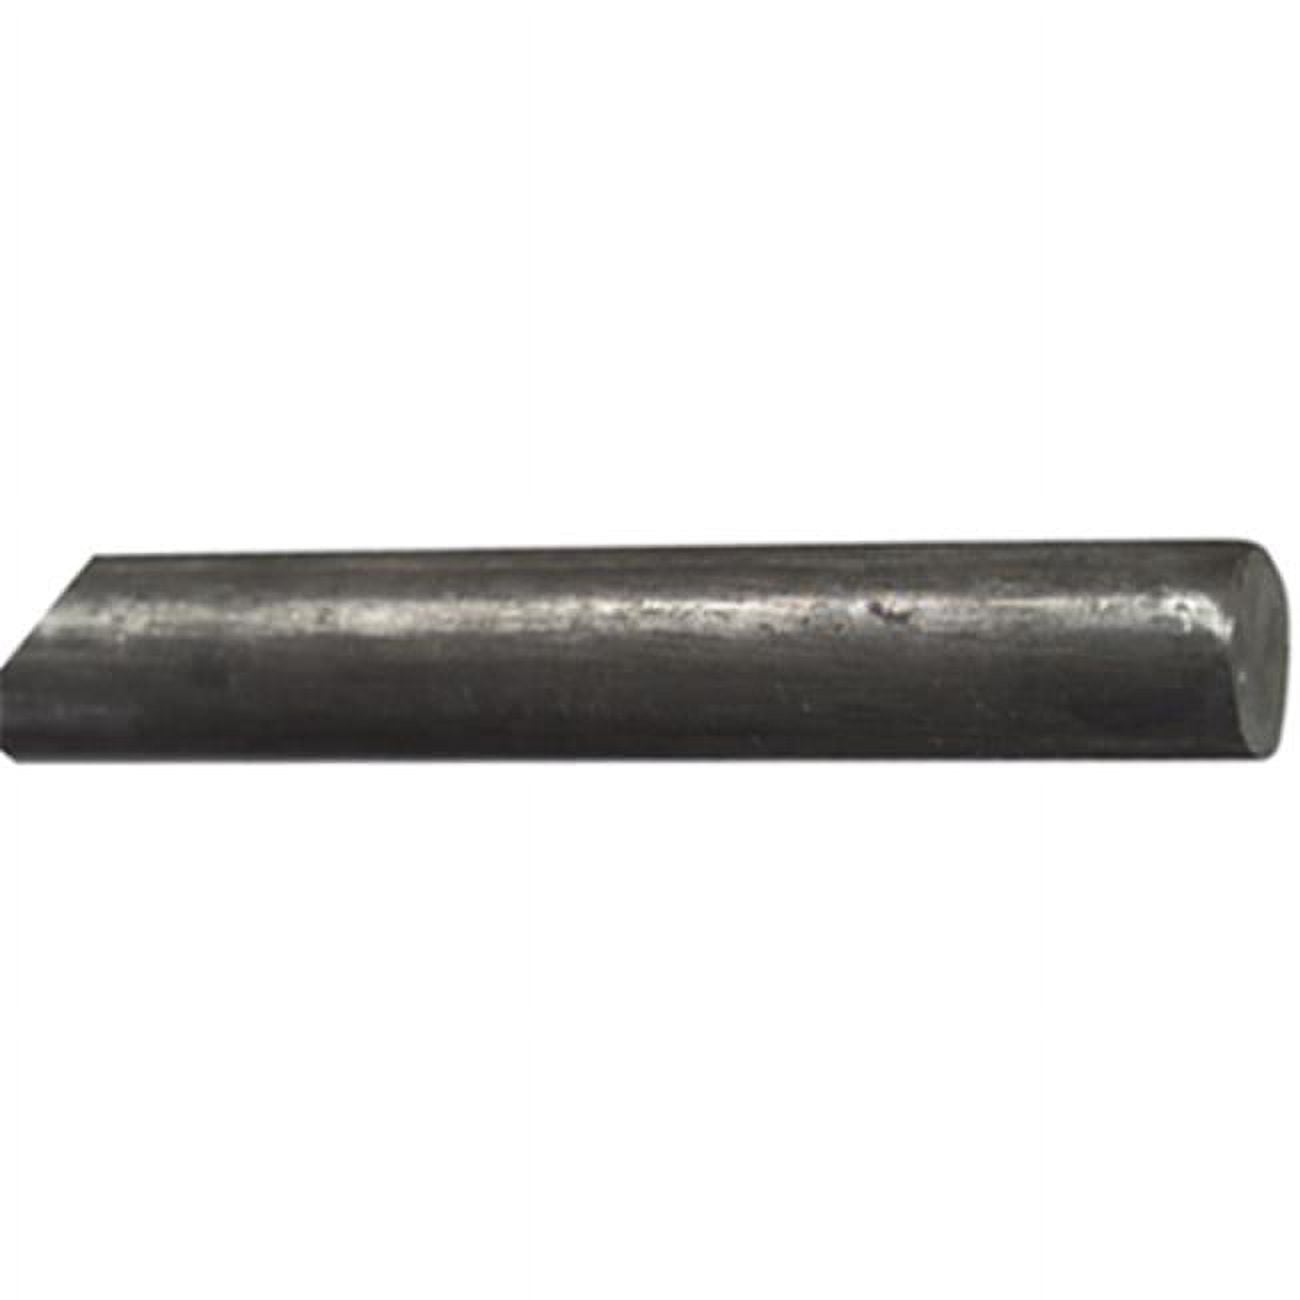 11605 0.62 X 3 Ft. Cold Rolled Steel Solid Weldable Round Rod